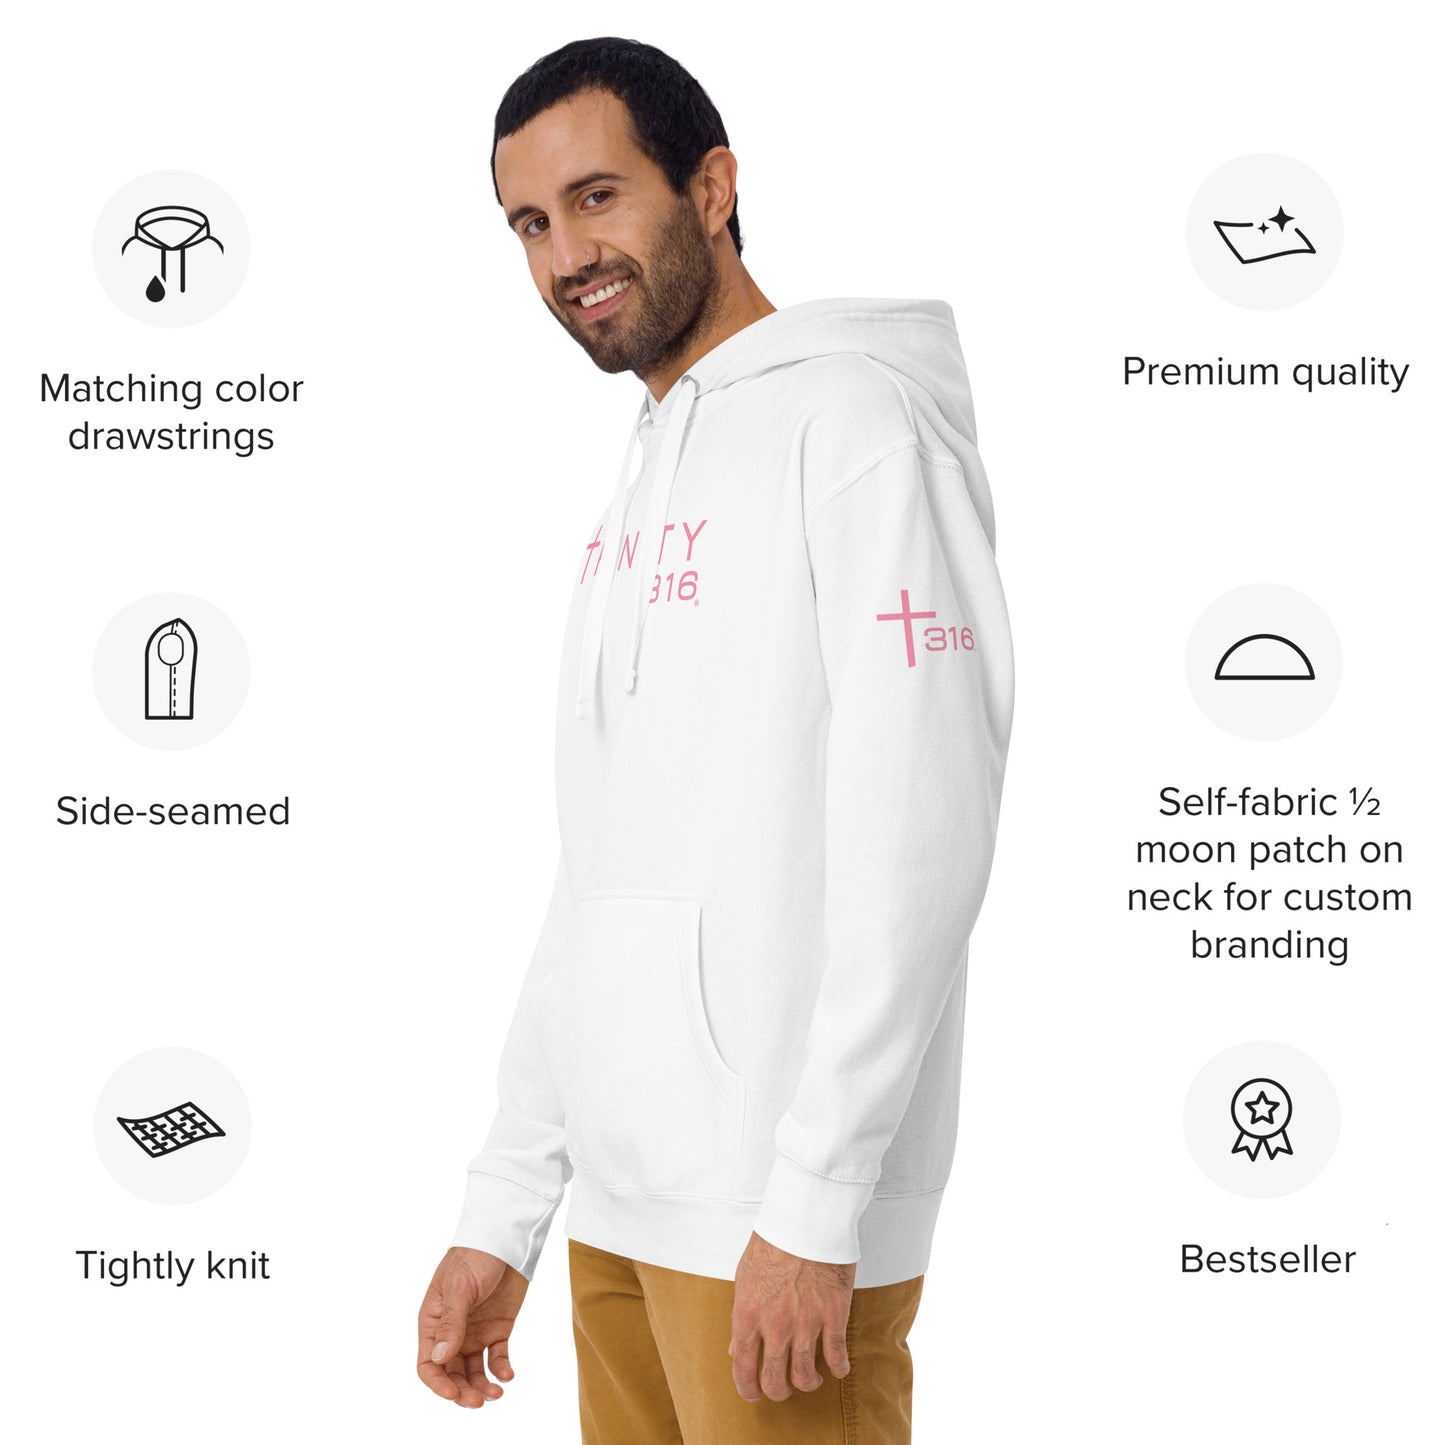 Trinity 316 Hoodie | Pink - White (Limited Edition)